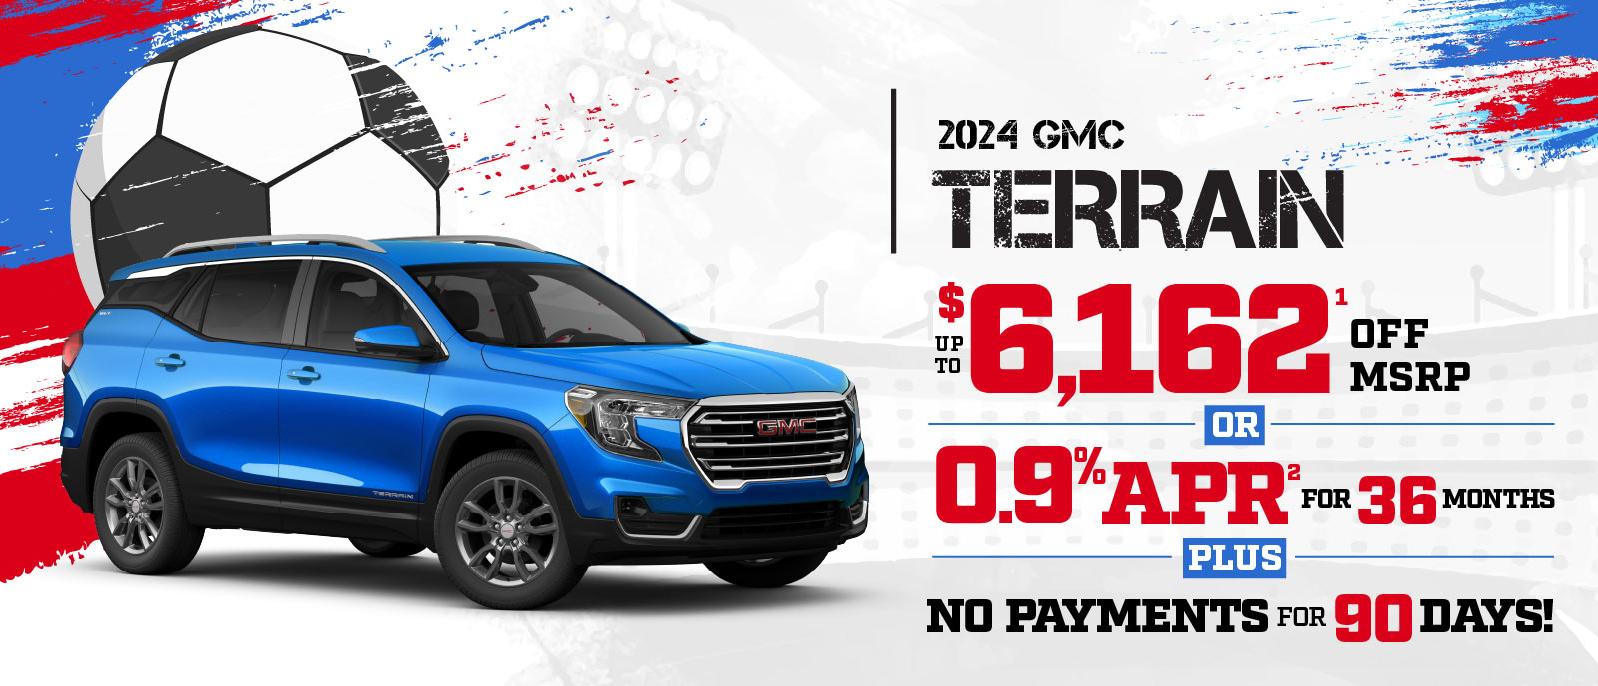 2024 GMC Terrain - up to $6162 OFF MSRP or 0.9% APR plus no payments for 90 days